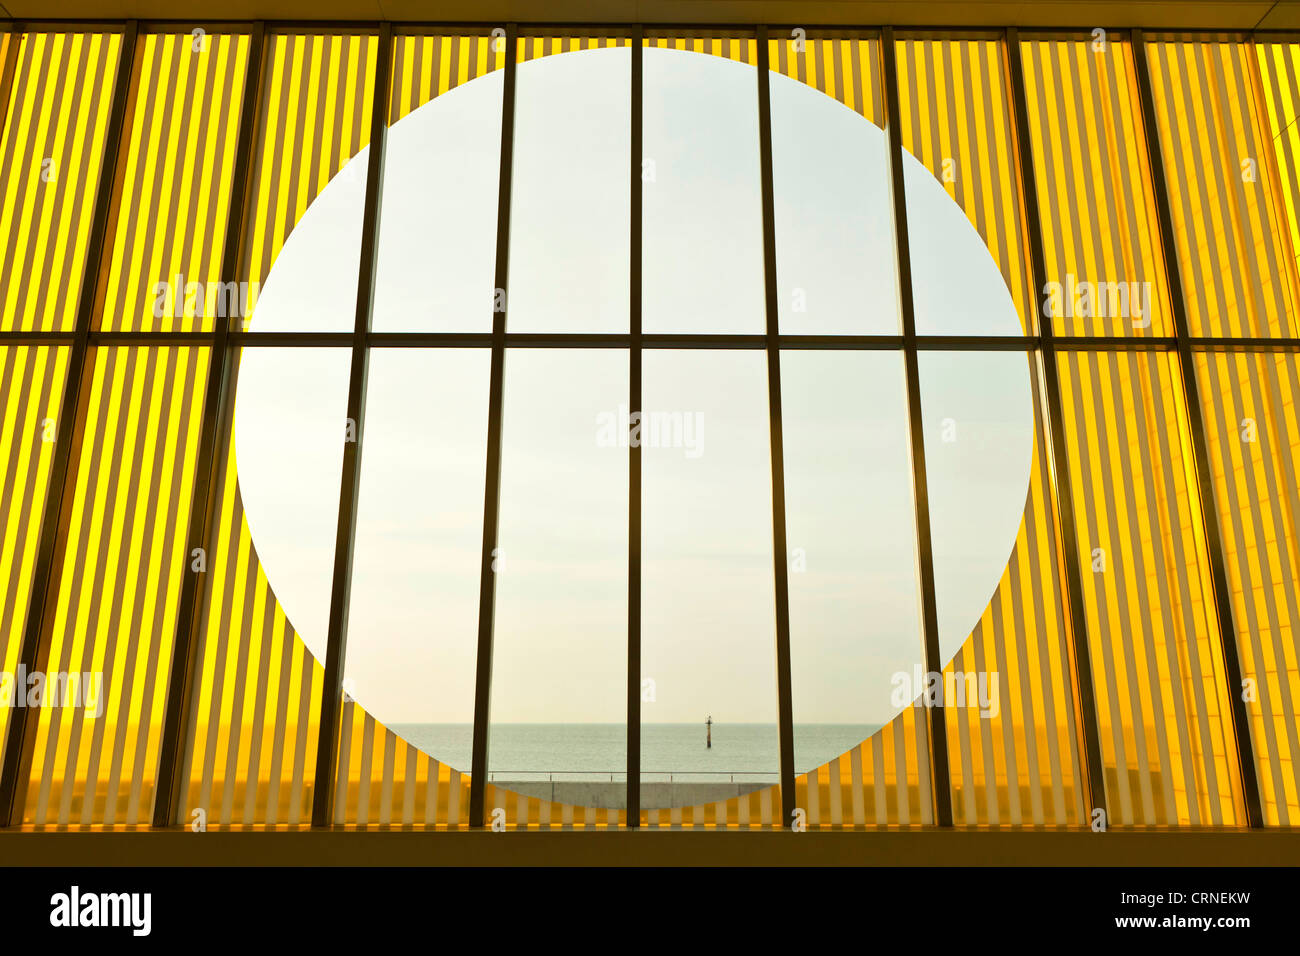 A view through the interior screen glass of the Turner Contemporary Gallery in Margate. Stock Photo